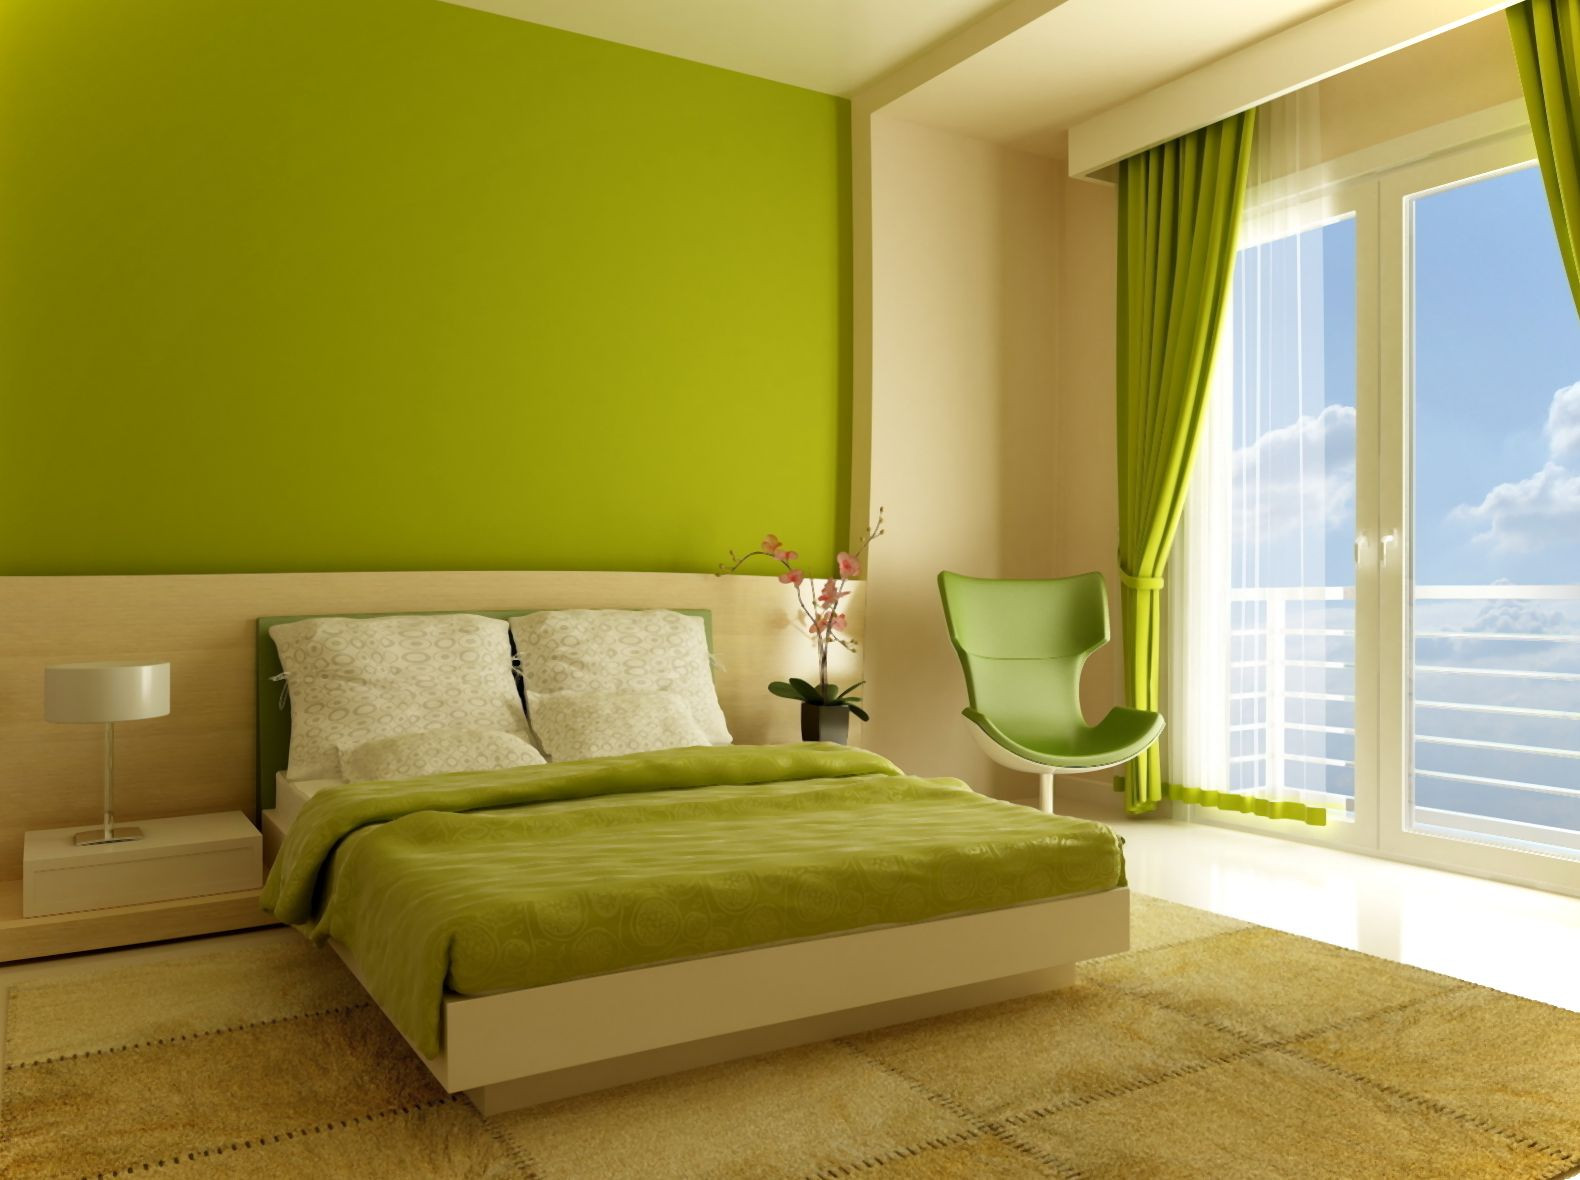 Bedroom Green Walls
 3 Essential Considerations in Choosing Paint Color for